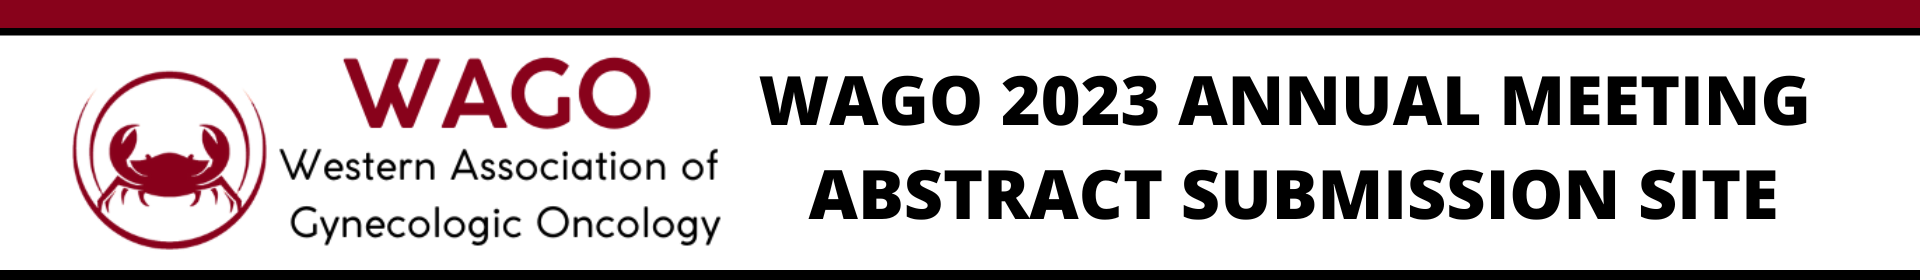 WAGO 2023 Annual Meeting Event Banner